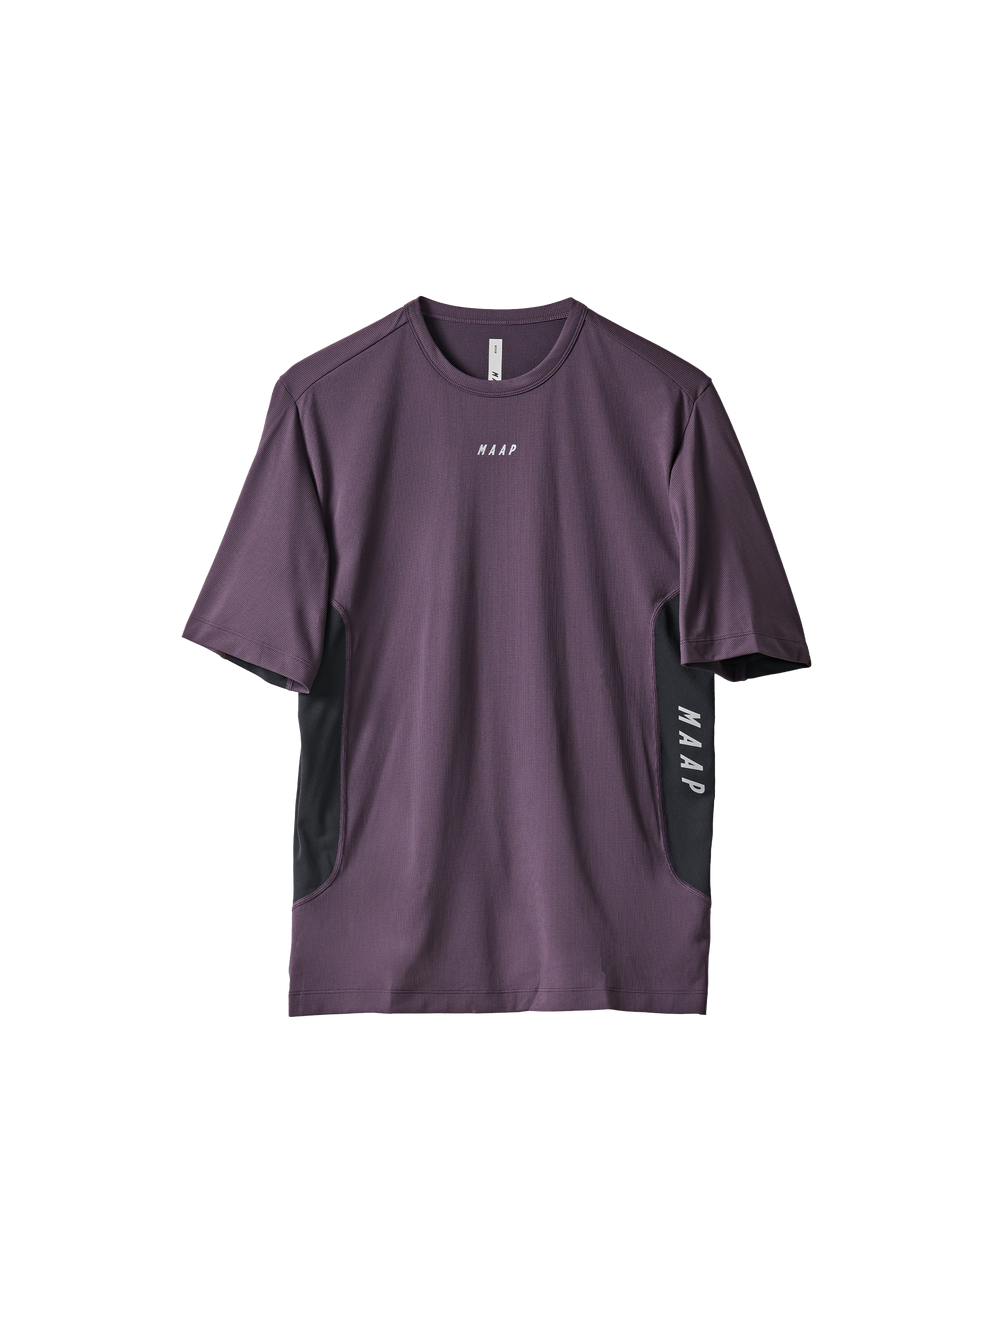 Product Image for Alt_Road Tech Tee